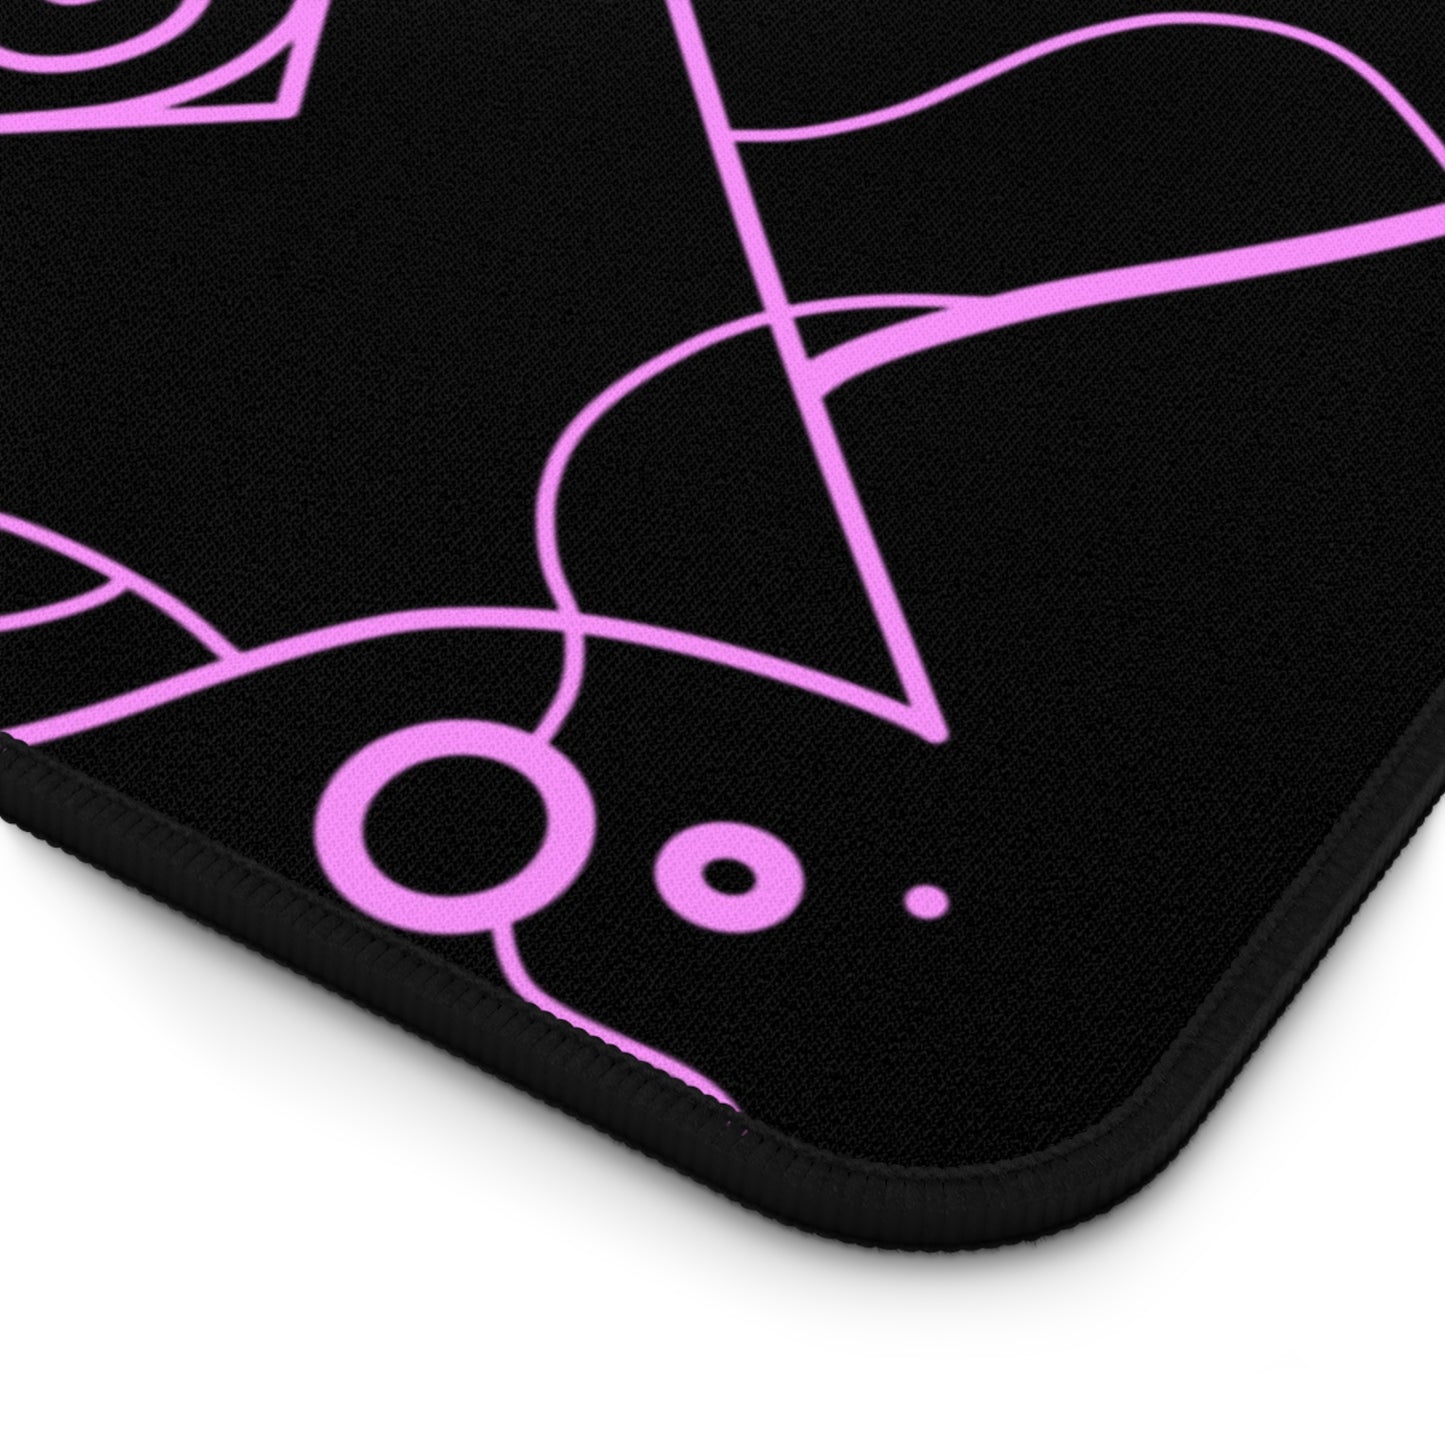 The corner of a 31" x 15.5" desk mat with a pink and blue mandala pattern on a black background.